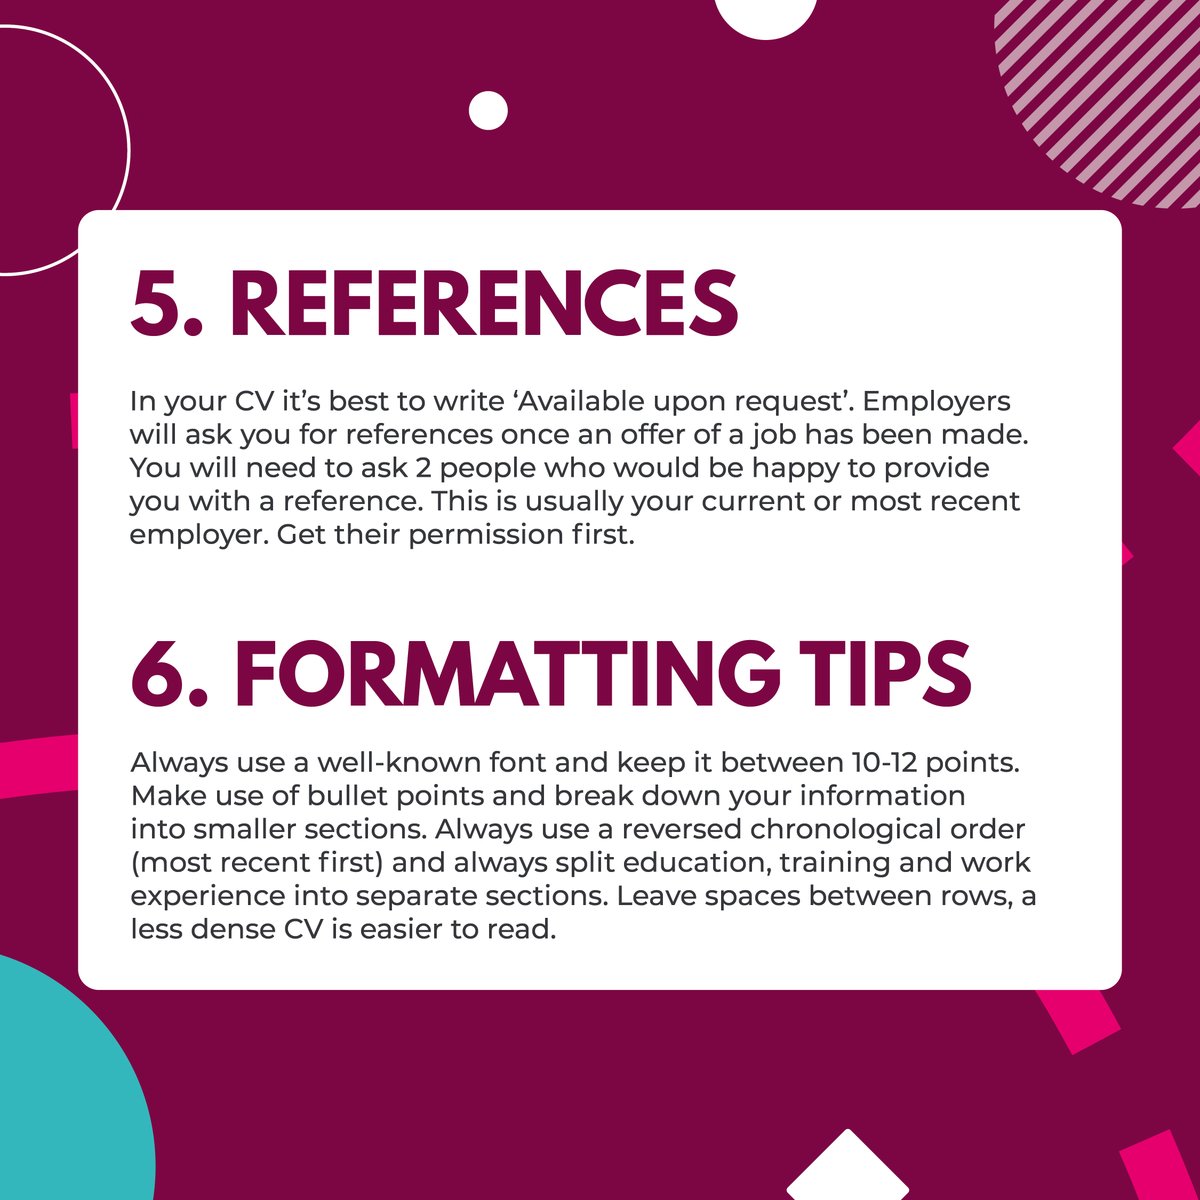 📌 Creating a Winning CV: Your Essential Checklist! Make your first impression count with these essential CV components. To find out more information contact the careers advisors here: bit.ly/42Z9W1T